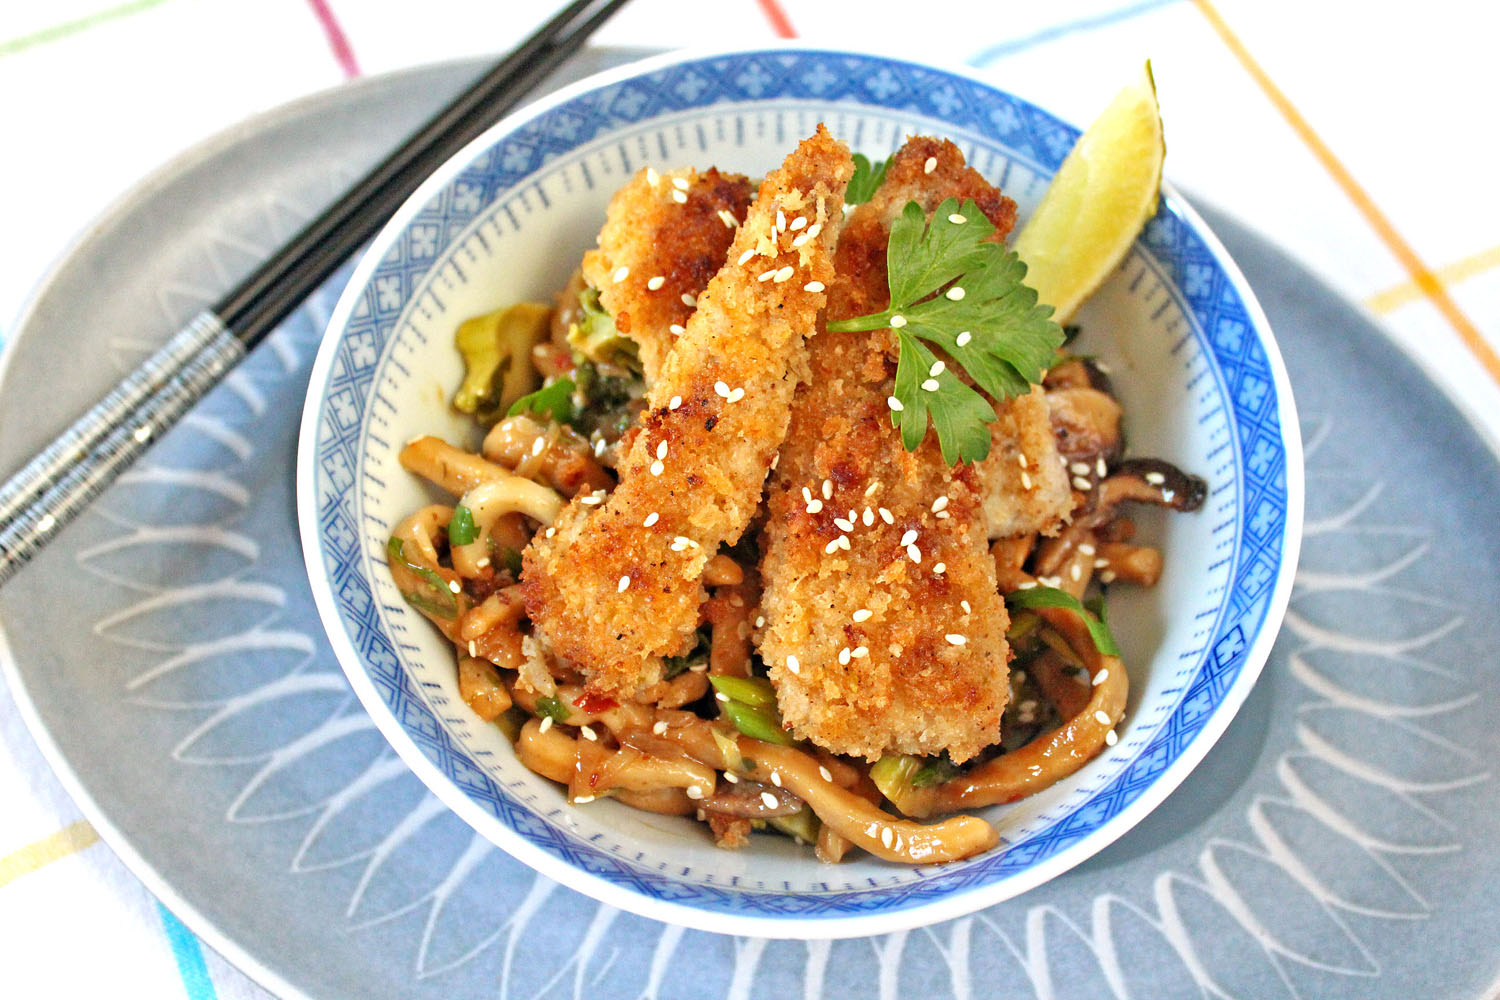 Crispy Bluefish with Spicy Udon Noodles